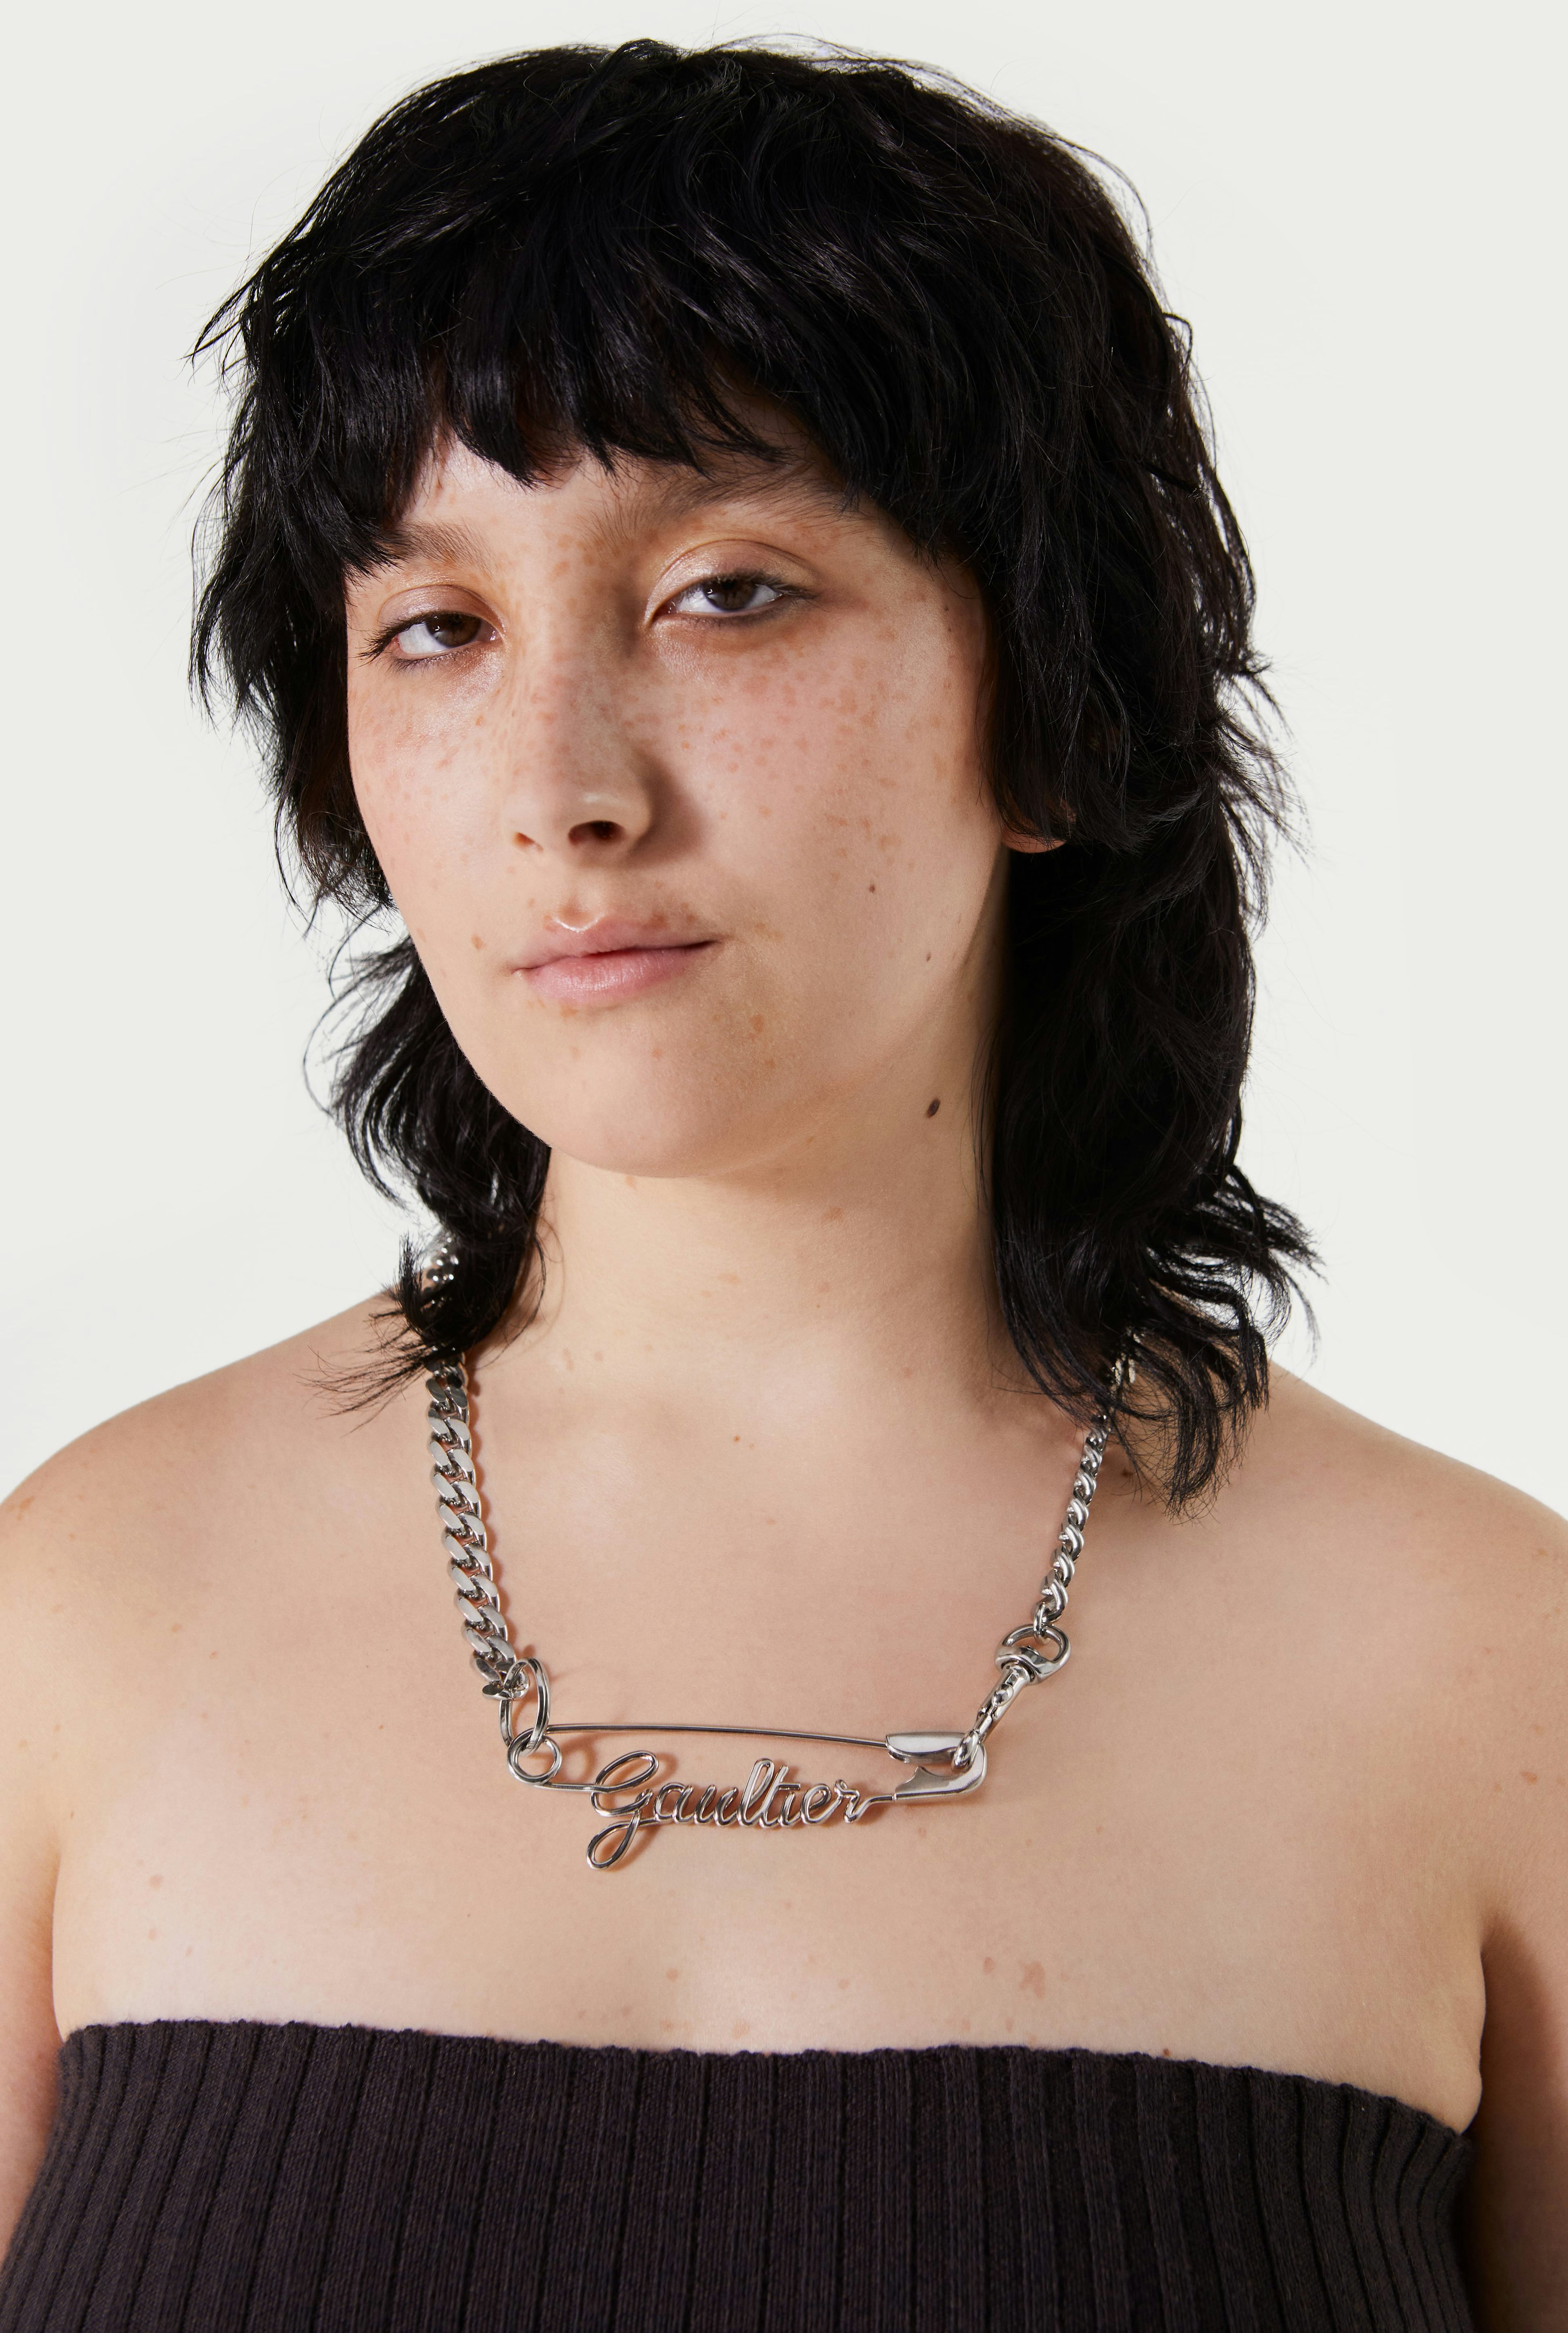 The Gaultier Safety Pin necklace  hover